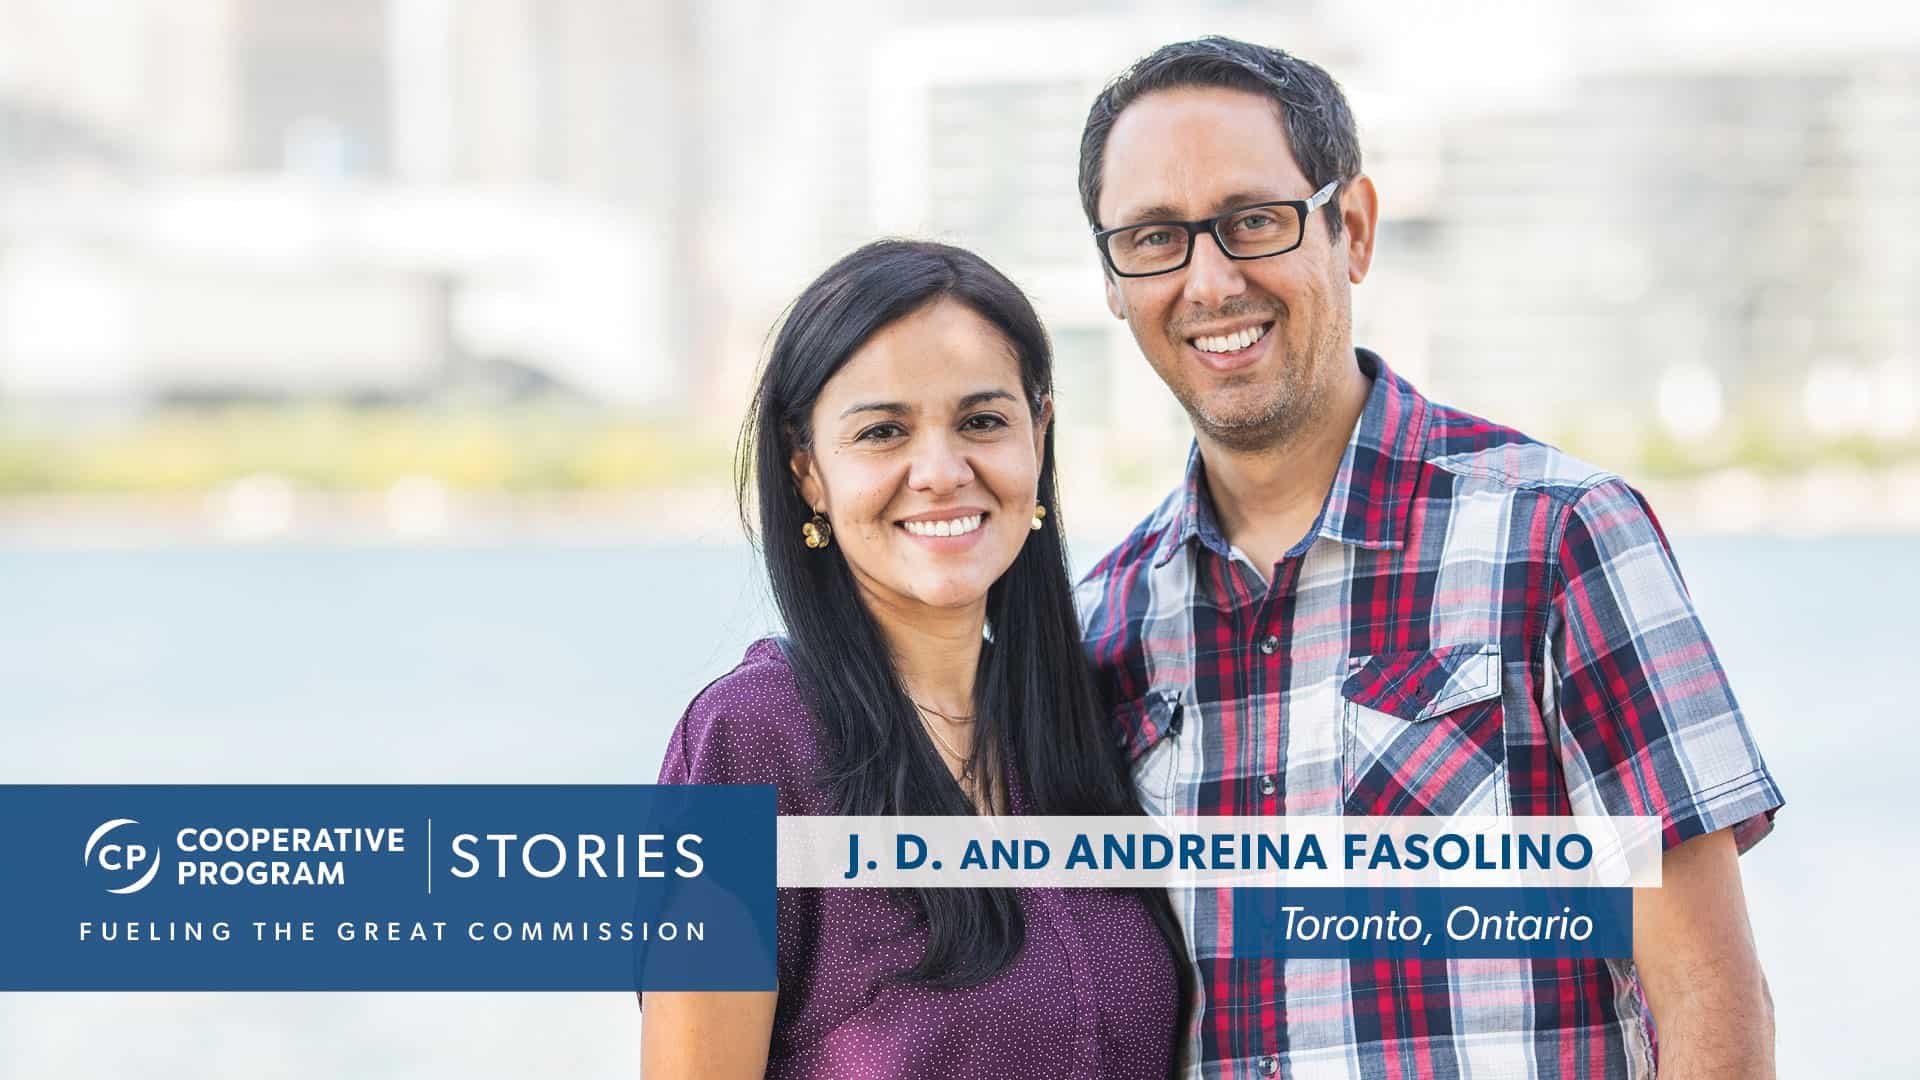 J.D and Andreina Fasoulino